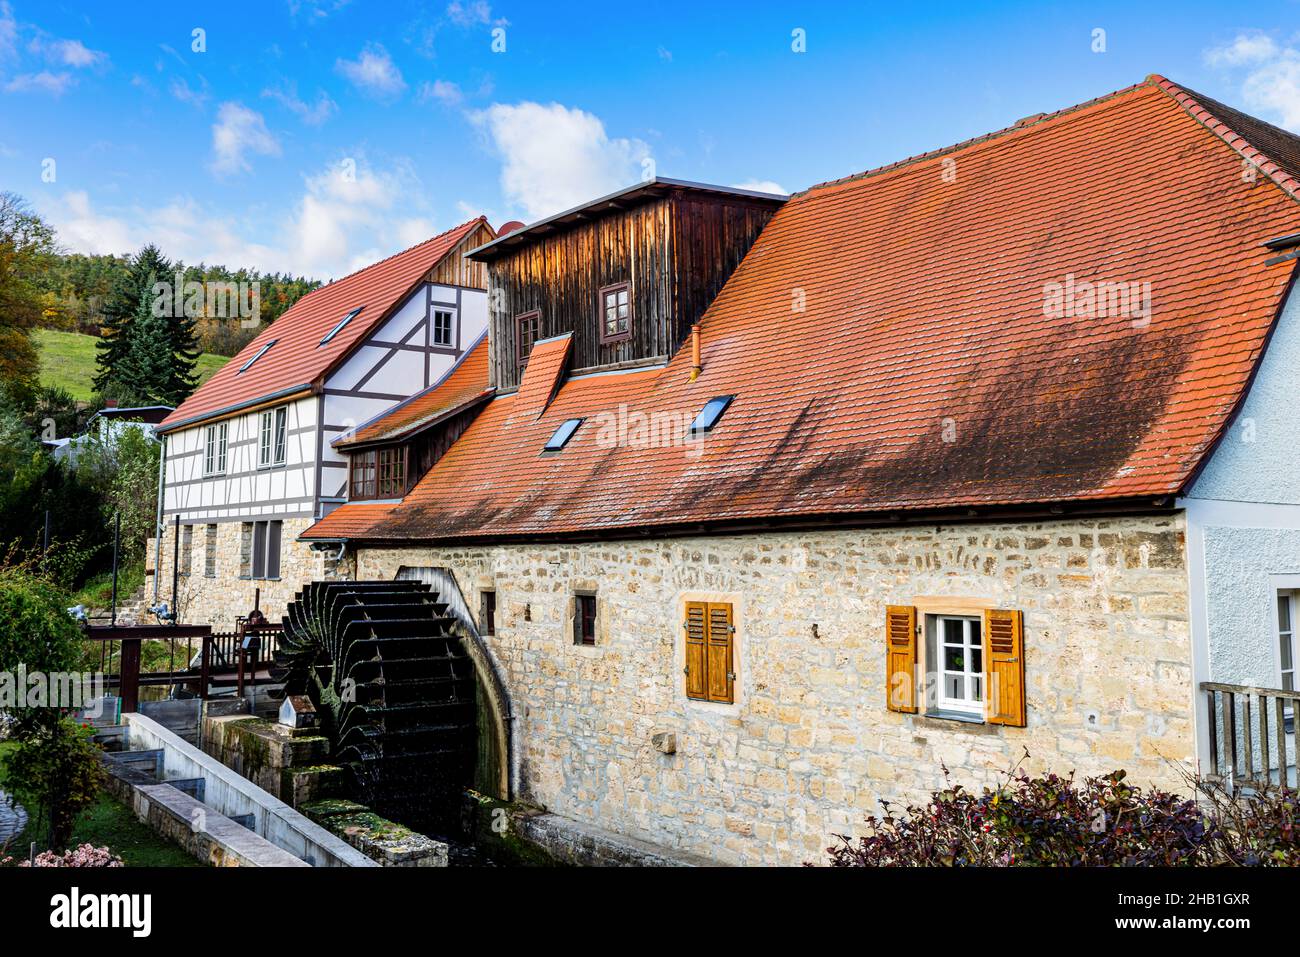 Historic water mill at the river Ilm in Buchfart, Thuringia, Germany. Stock Photo